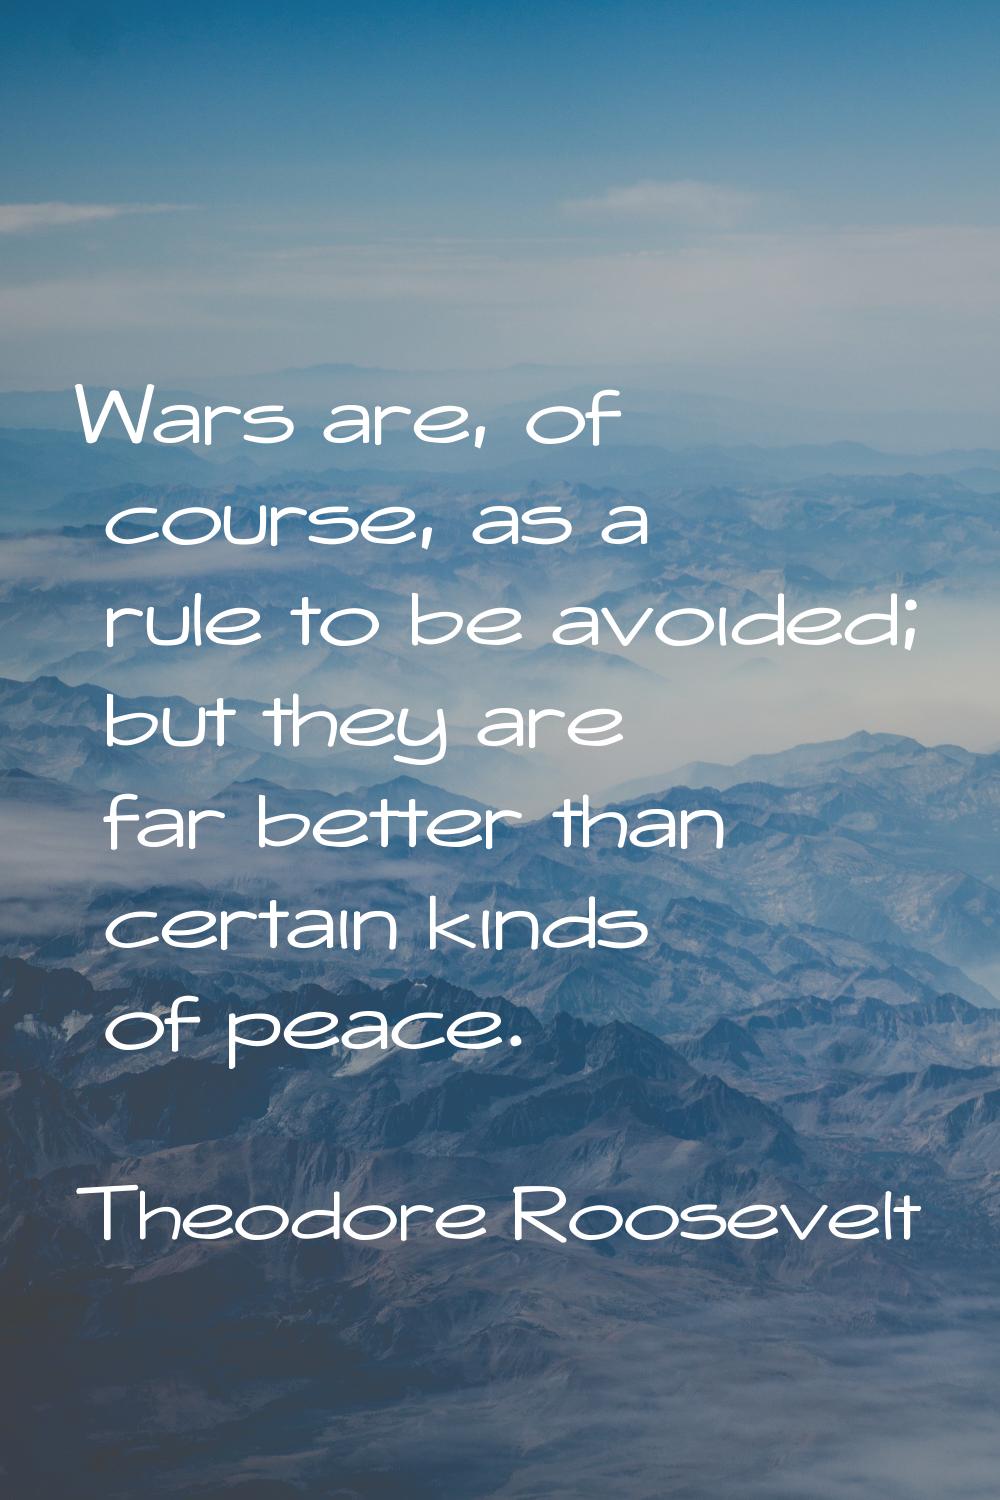 Wars are, of course, as a rule to be avoided; but they are far better than certain kinds of peace.